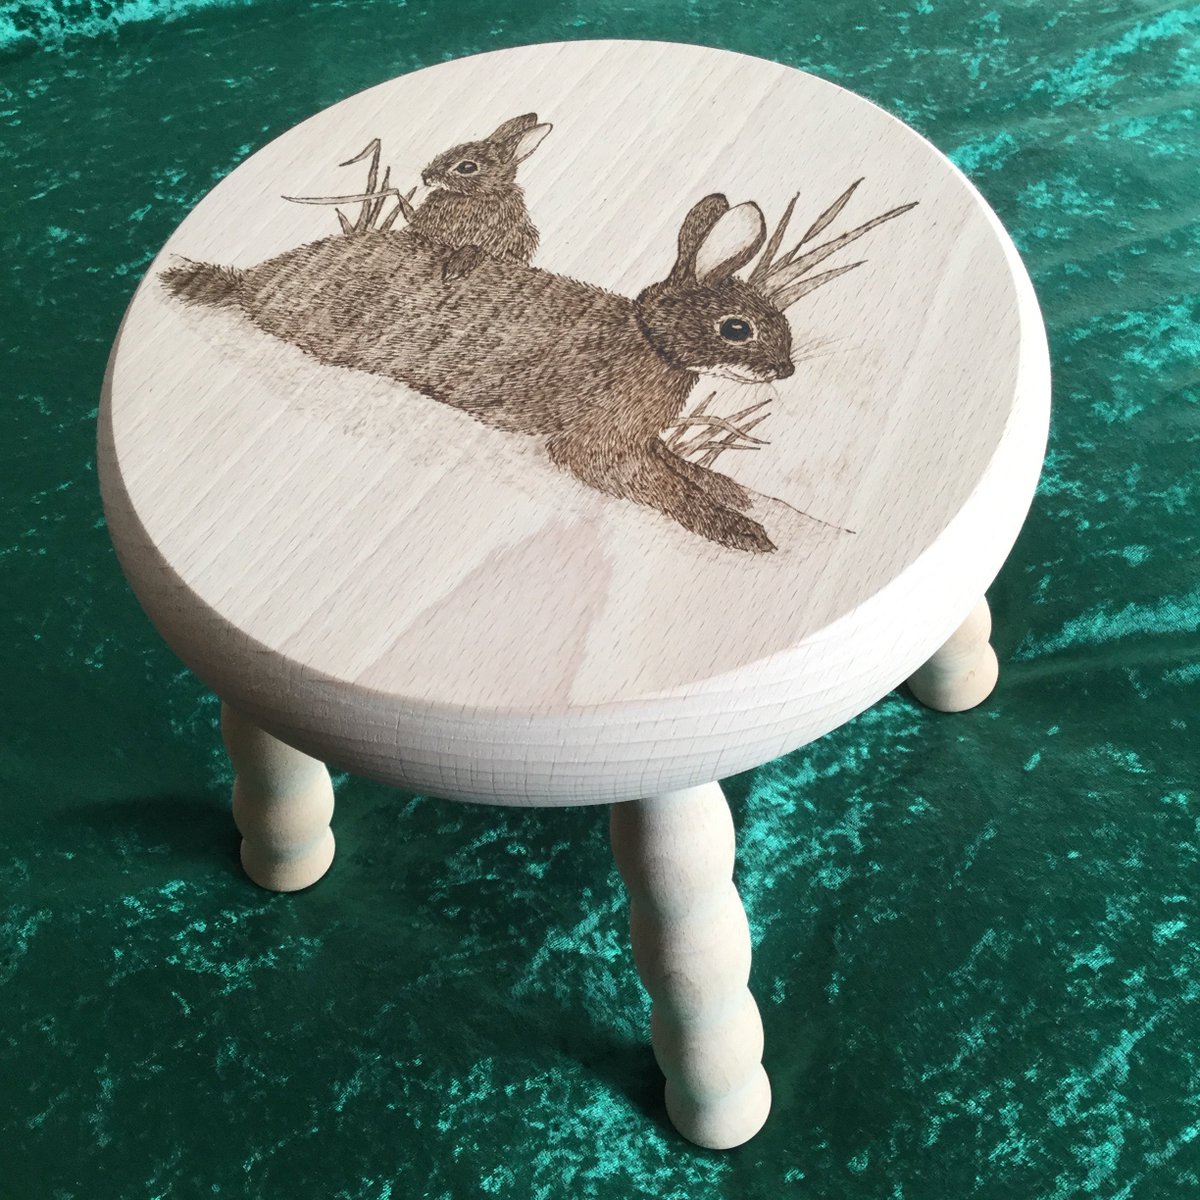 Excited to share the latest addition to my #etsy shop: Personalised Wooden Stool with Rabbits or Mice - Christening gift, childs present, New Baby gift etsy.me/2EK8vuB #housewares #homedecor #woodenstool #christeninggift #newbabygift #childsgift